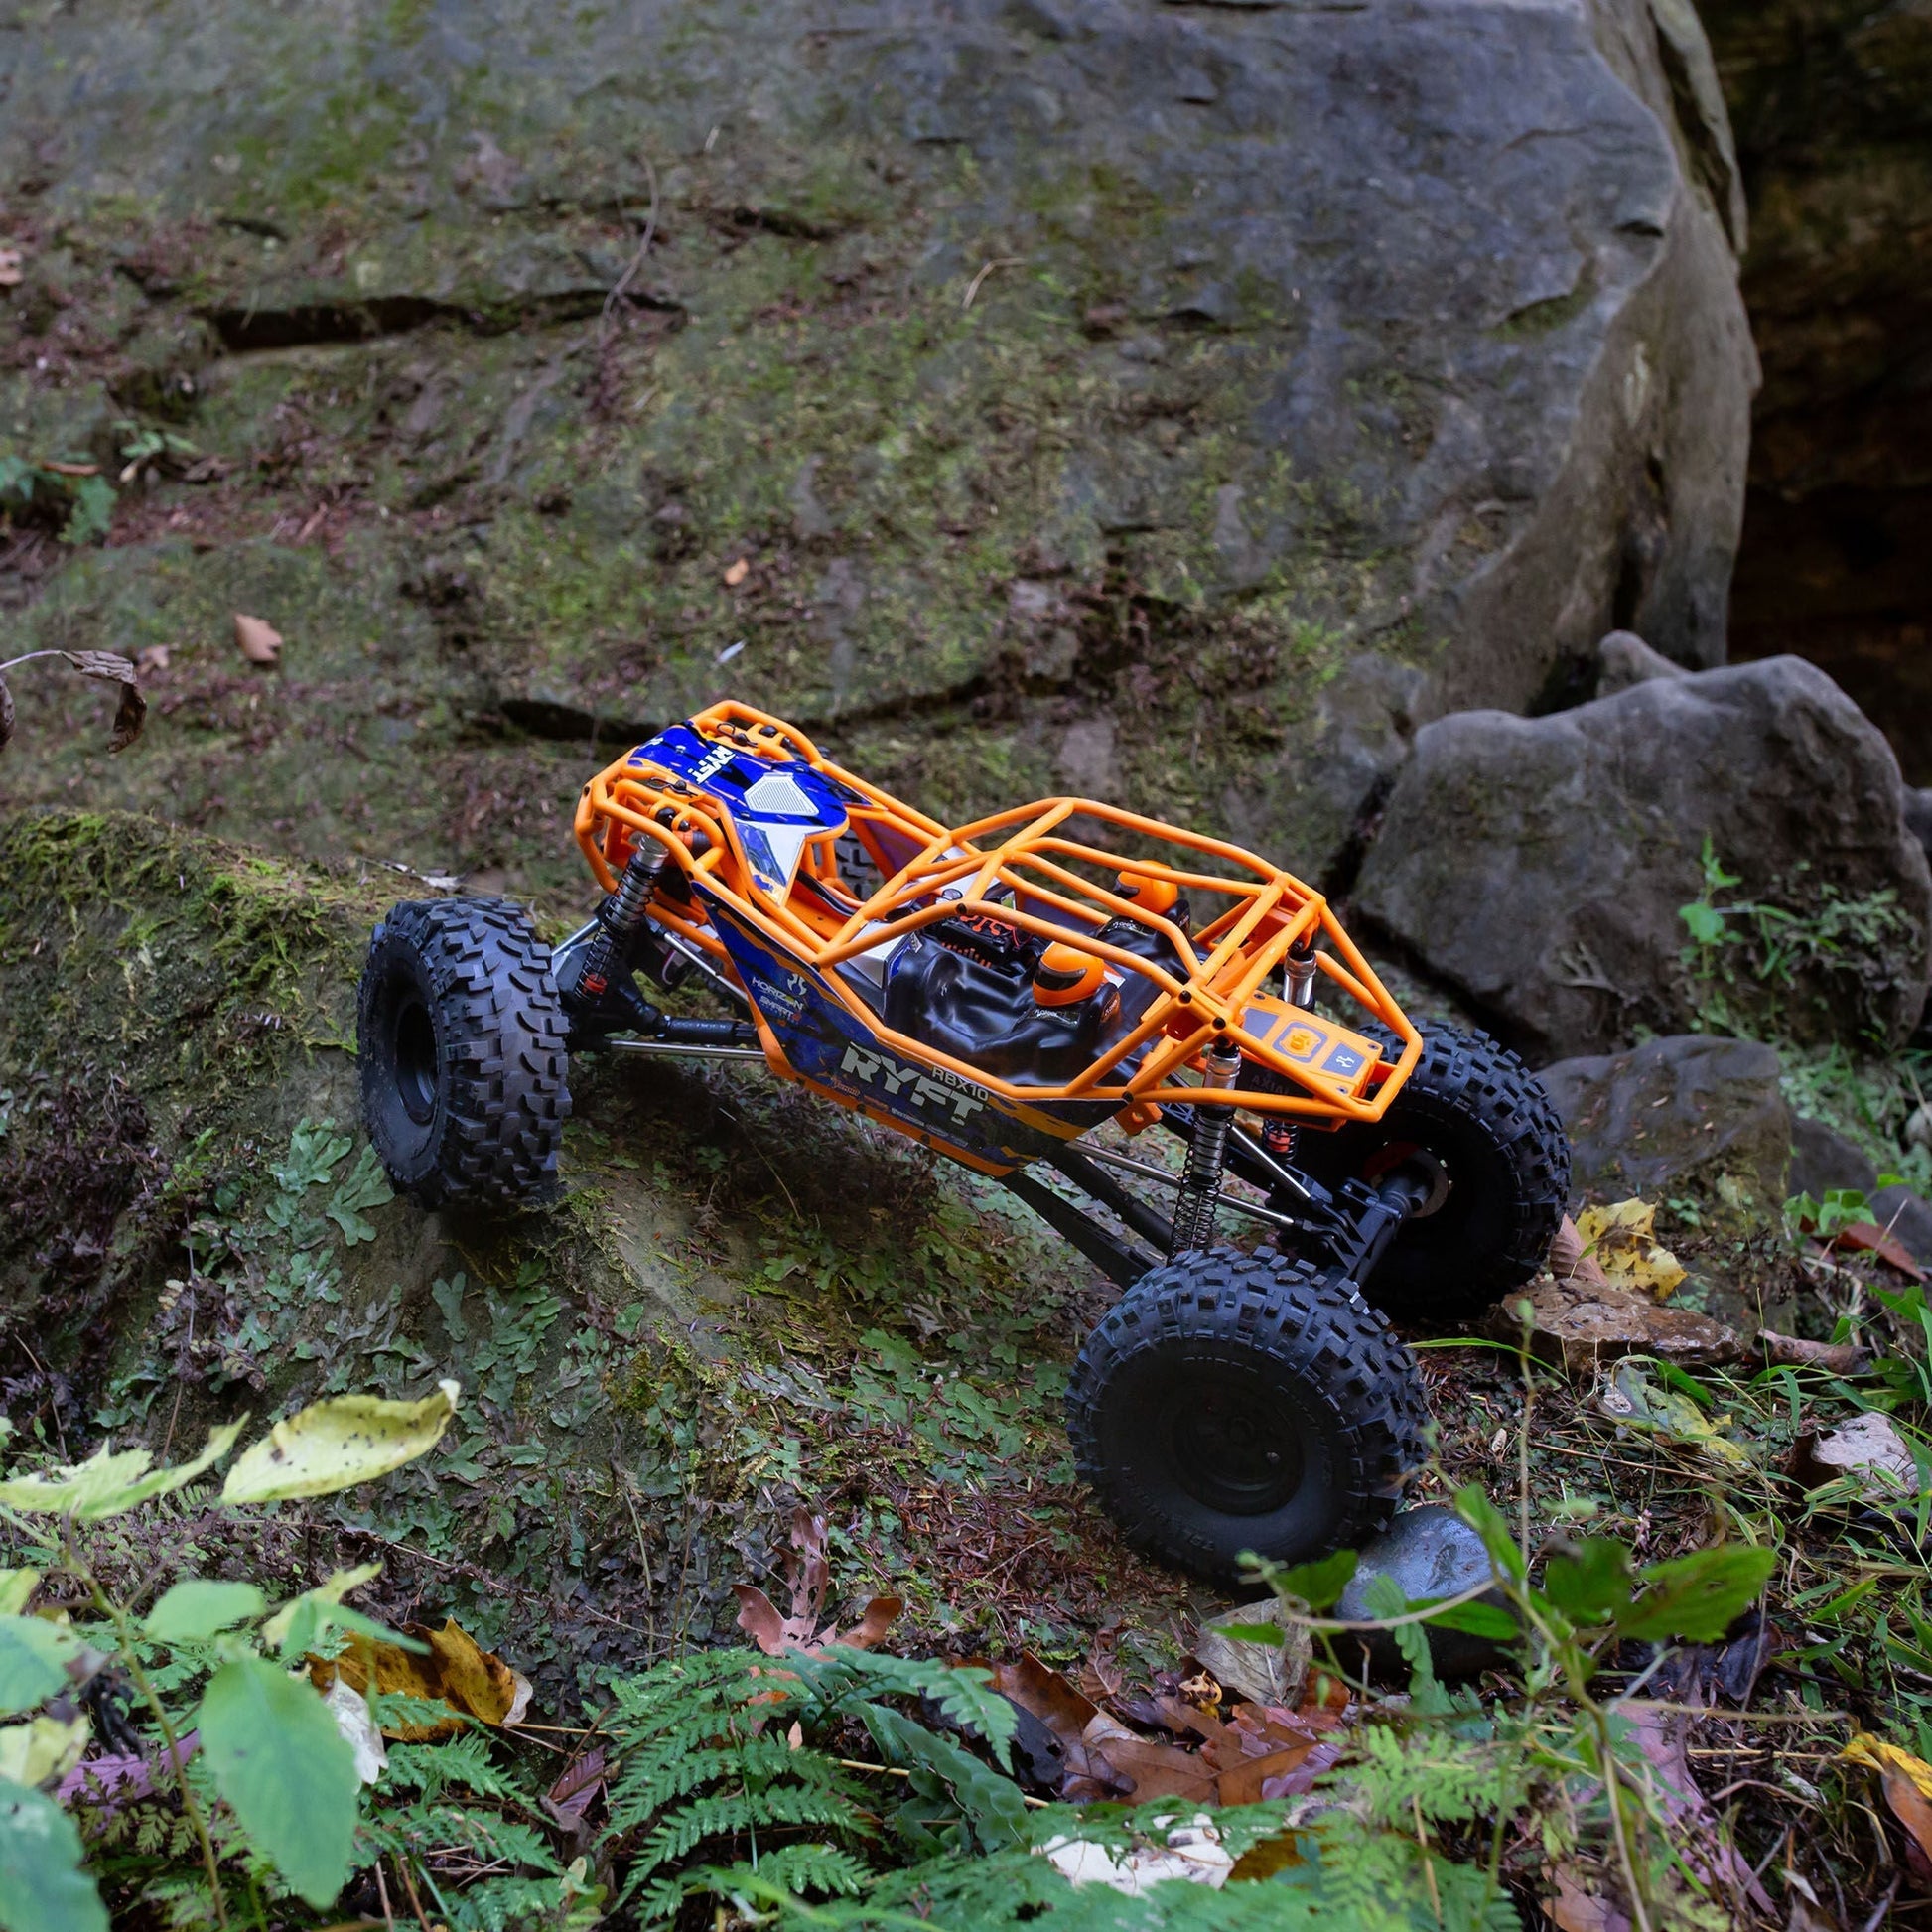 1/10 RBX10 Ryft 4WD Brushless Rock Bouncer RTR Orange - Dirt Cheap RC SAVING YOU MONEY, ONE PART AT A TIME